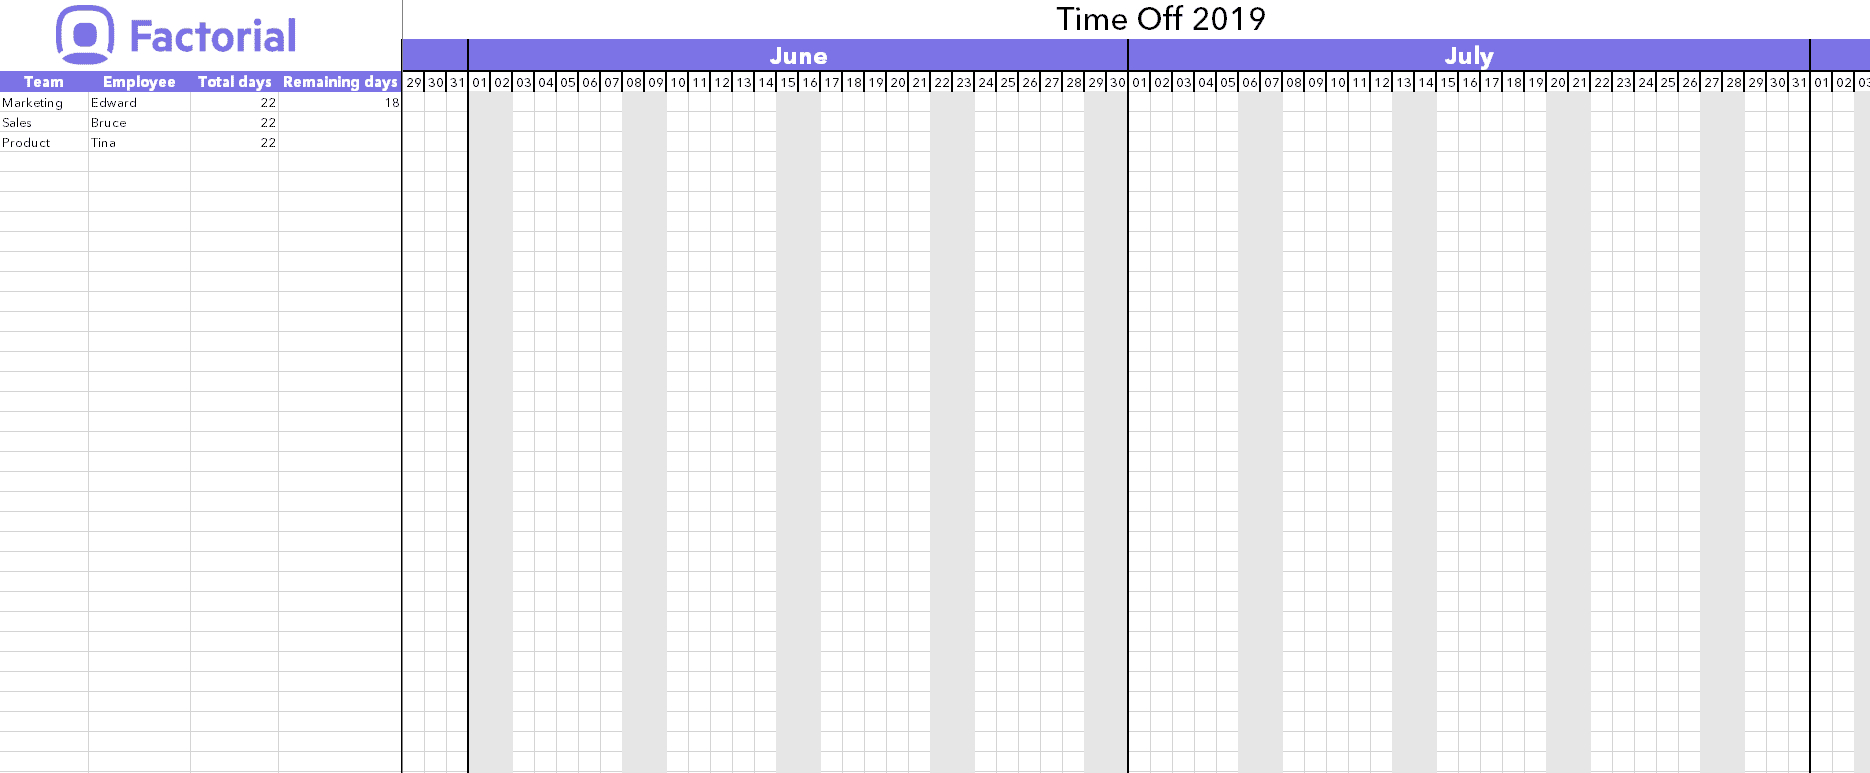 Manage Time Off Requests W Free Template | Factorial intended for Pto Calendar Template